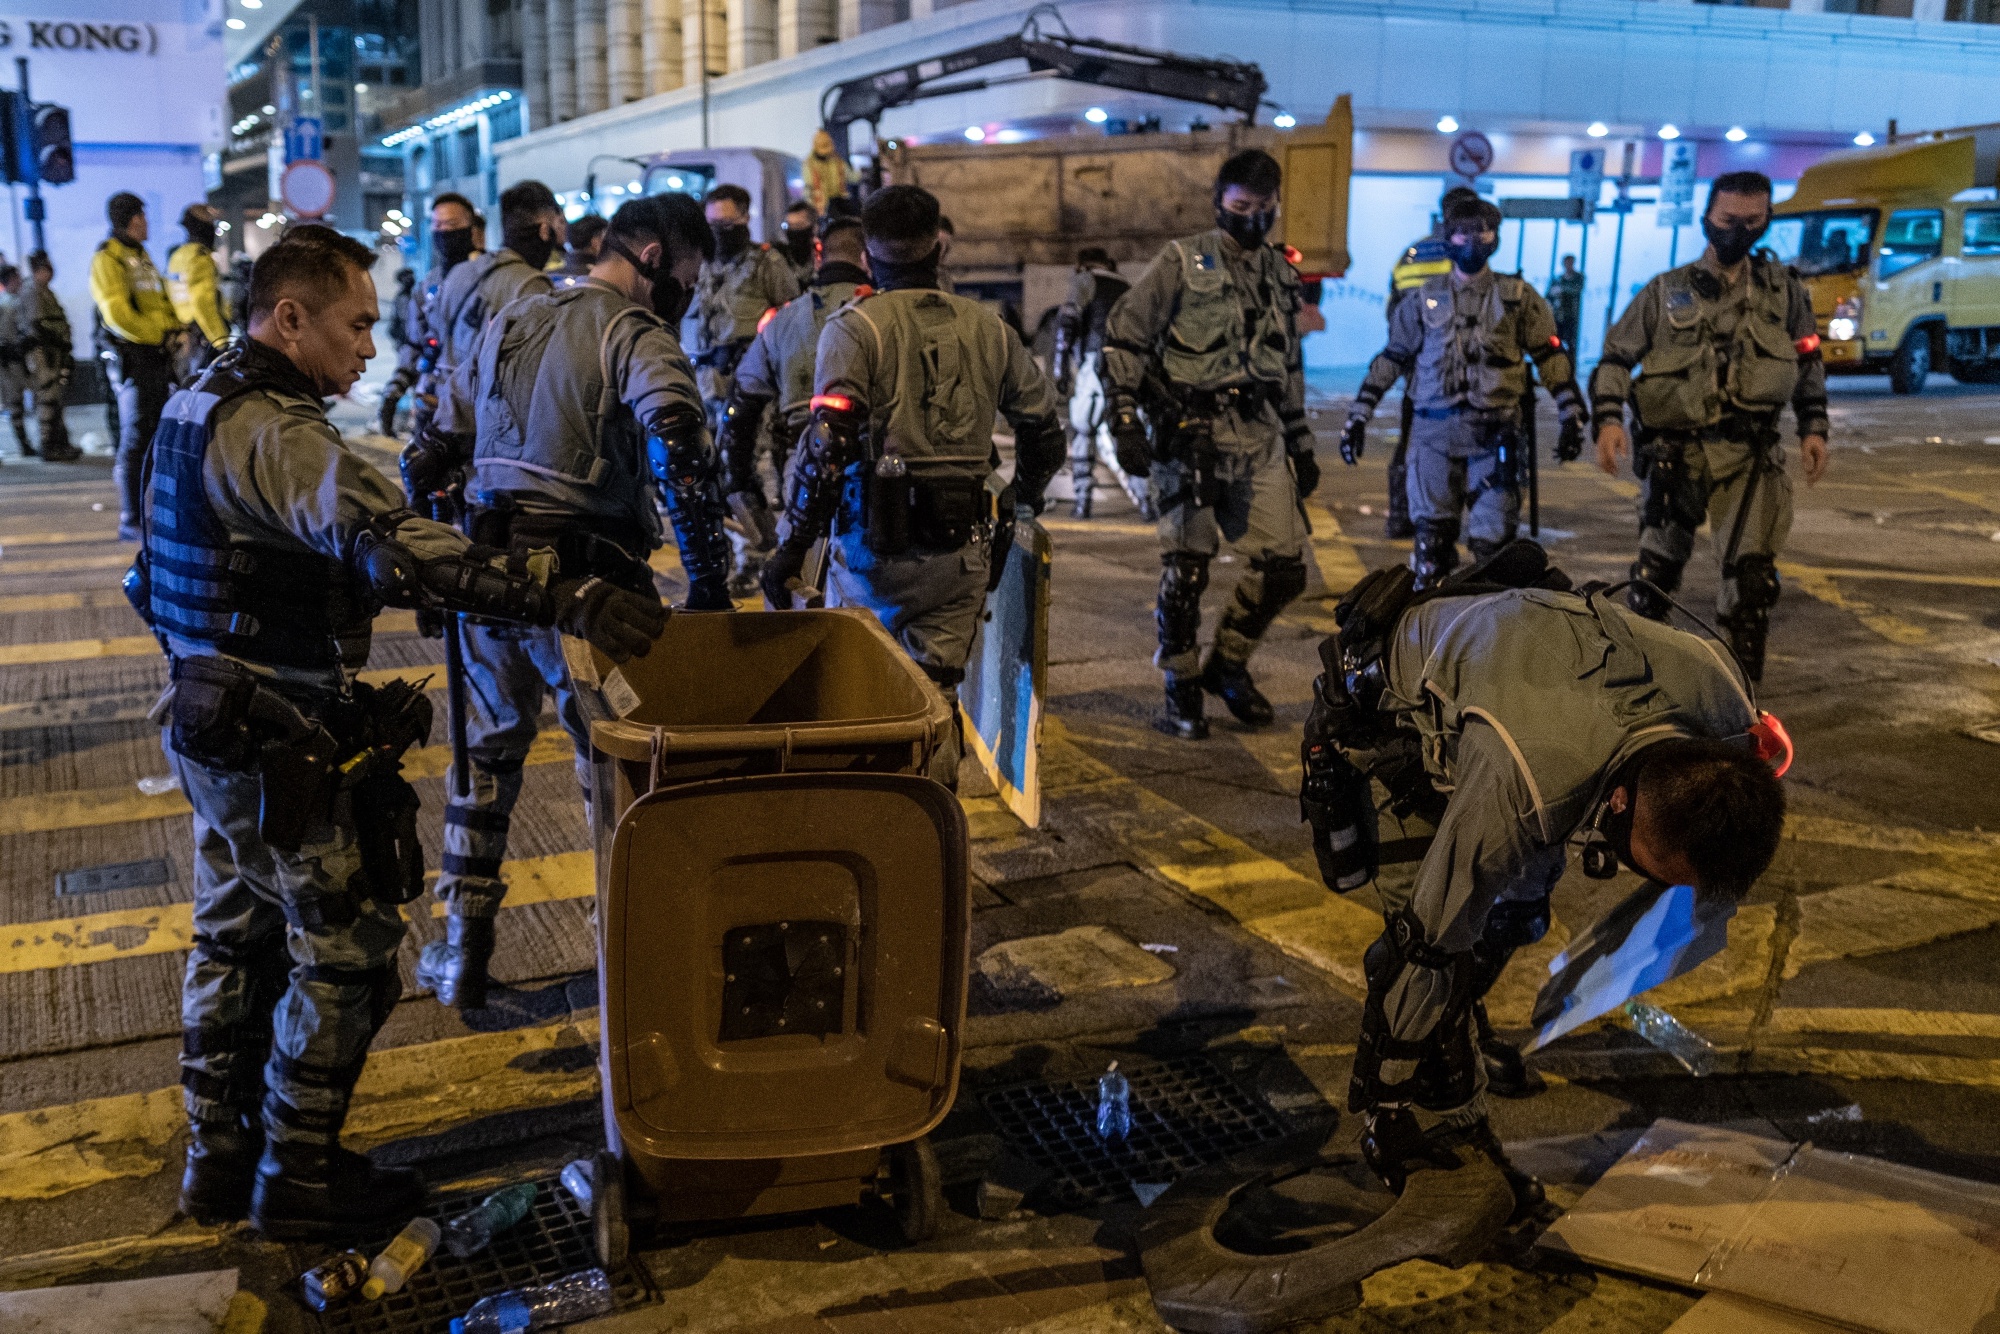 Riot police remove a barricade set by demonstrators in Central, Dec. 8.